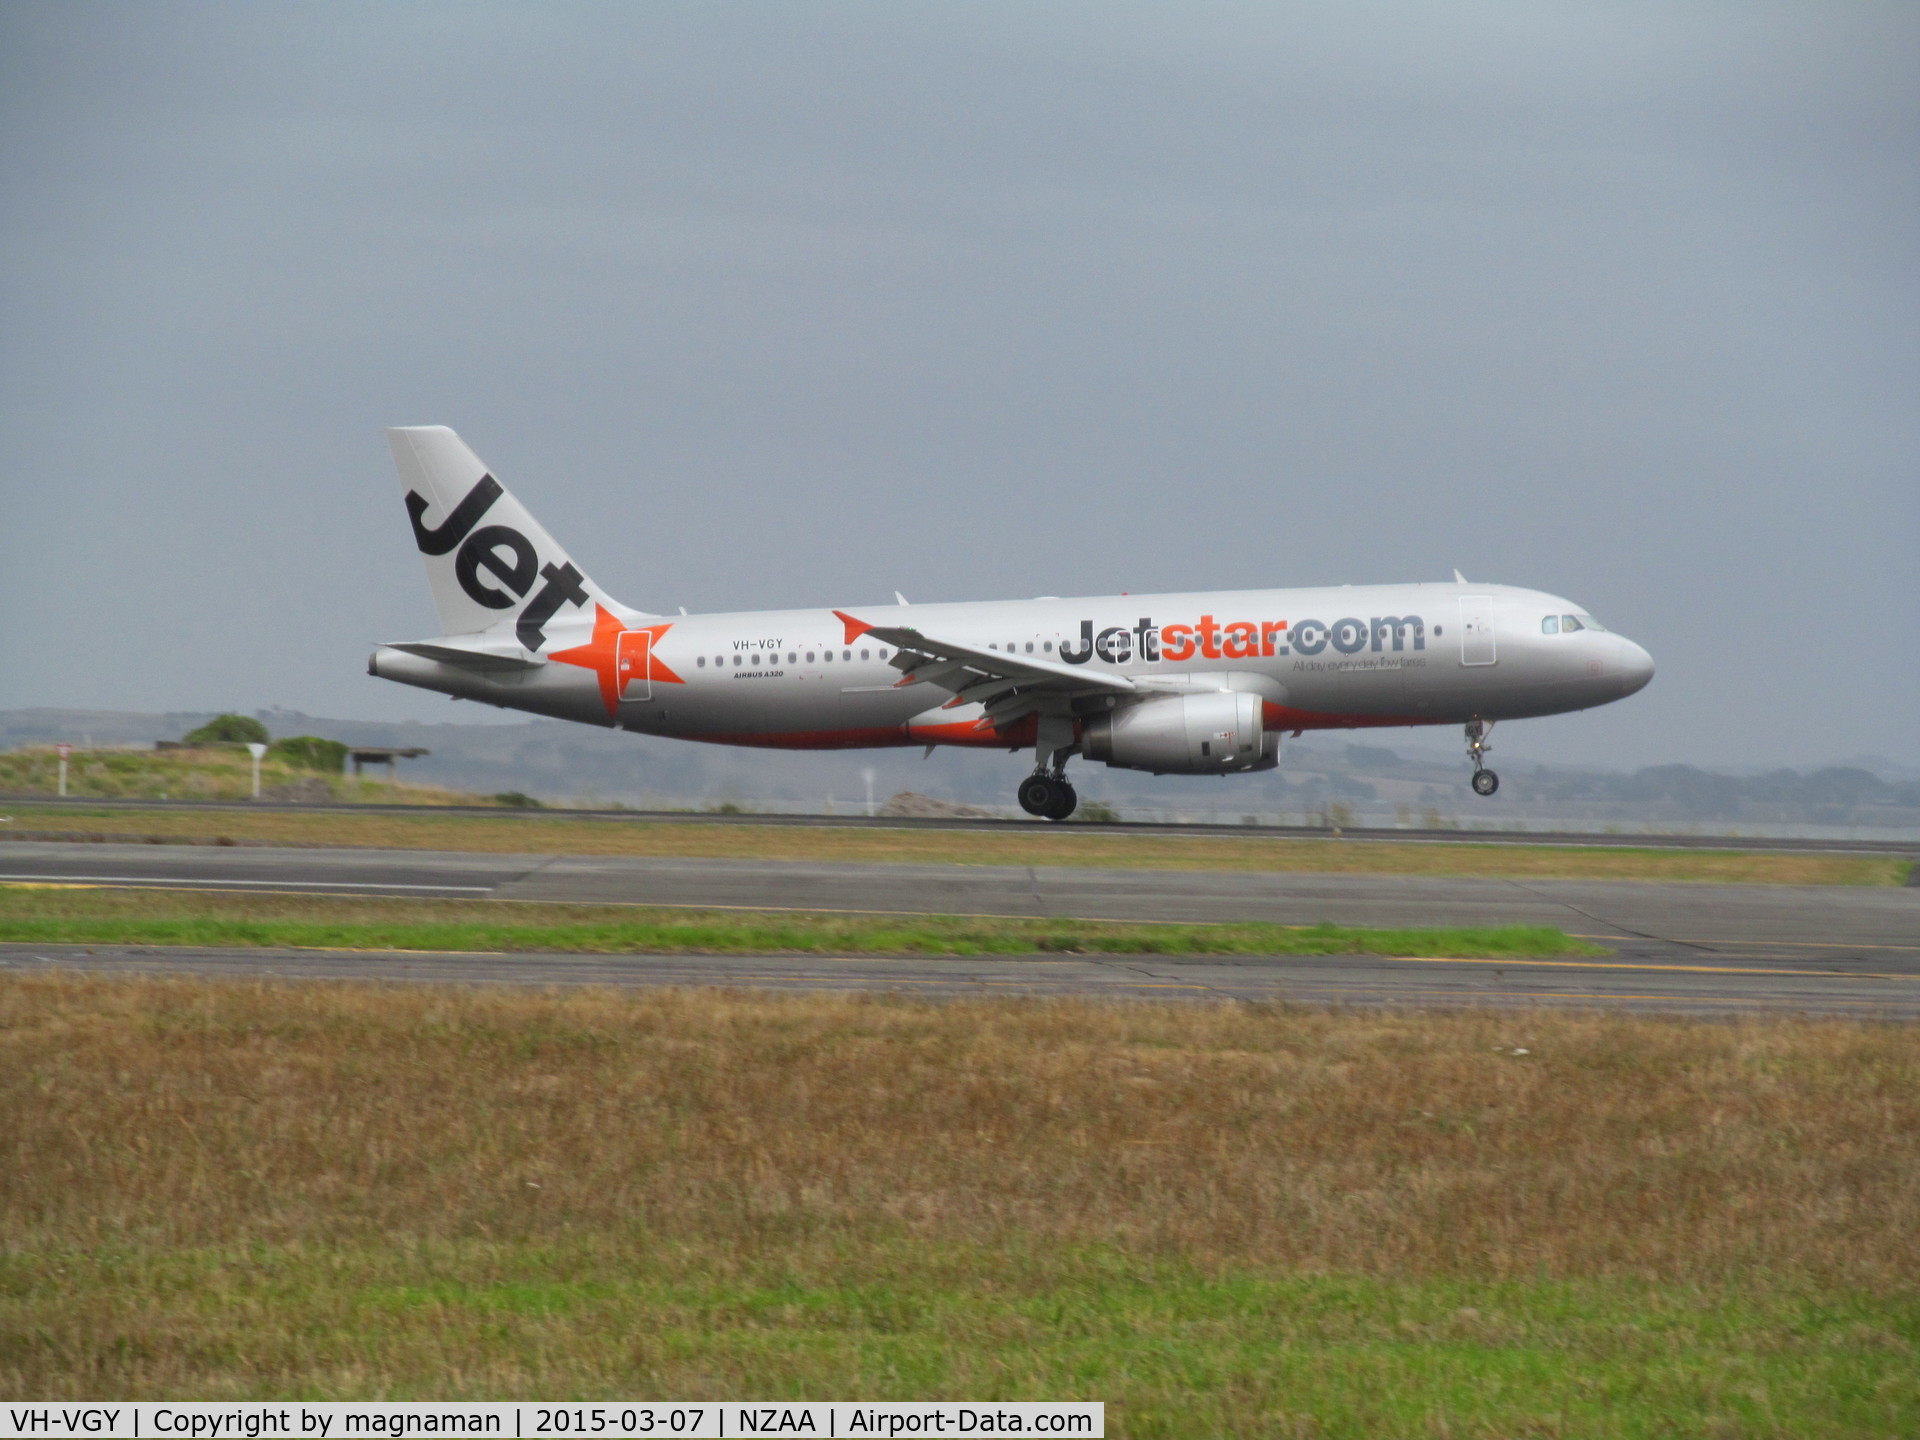 VH-VGY, 2010 Airbus A320-232 C/N 4177, touch down at auckland